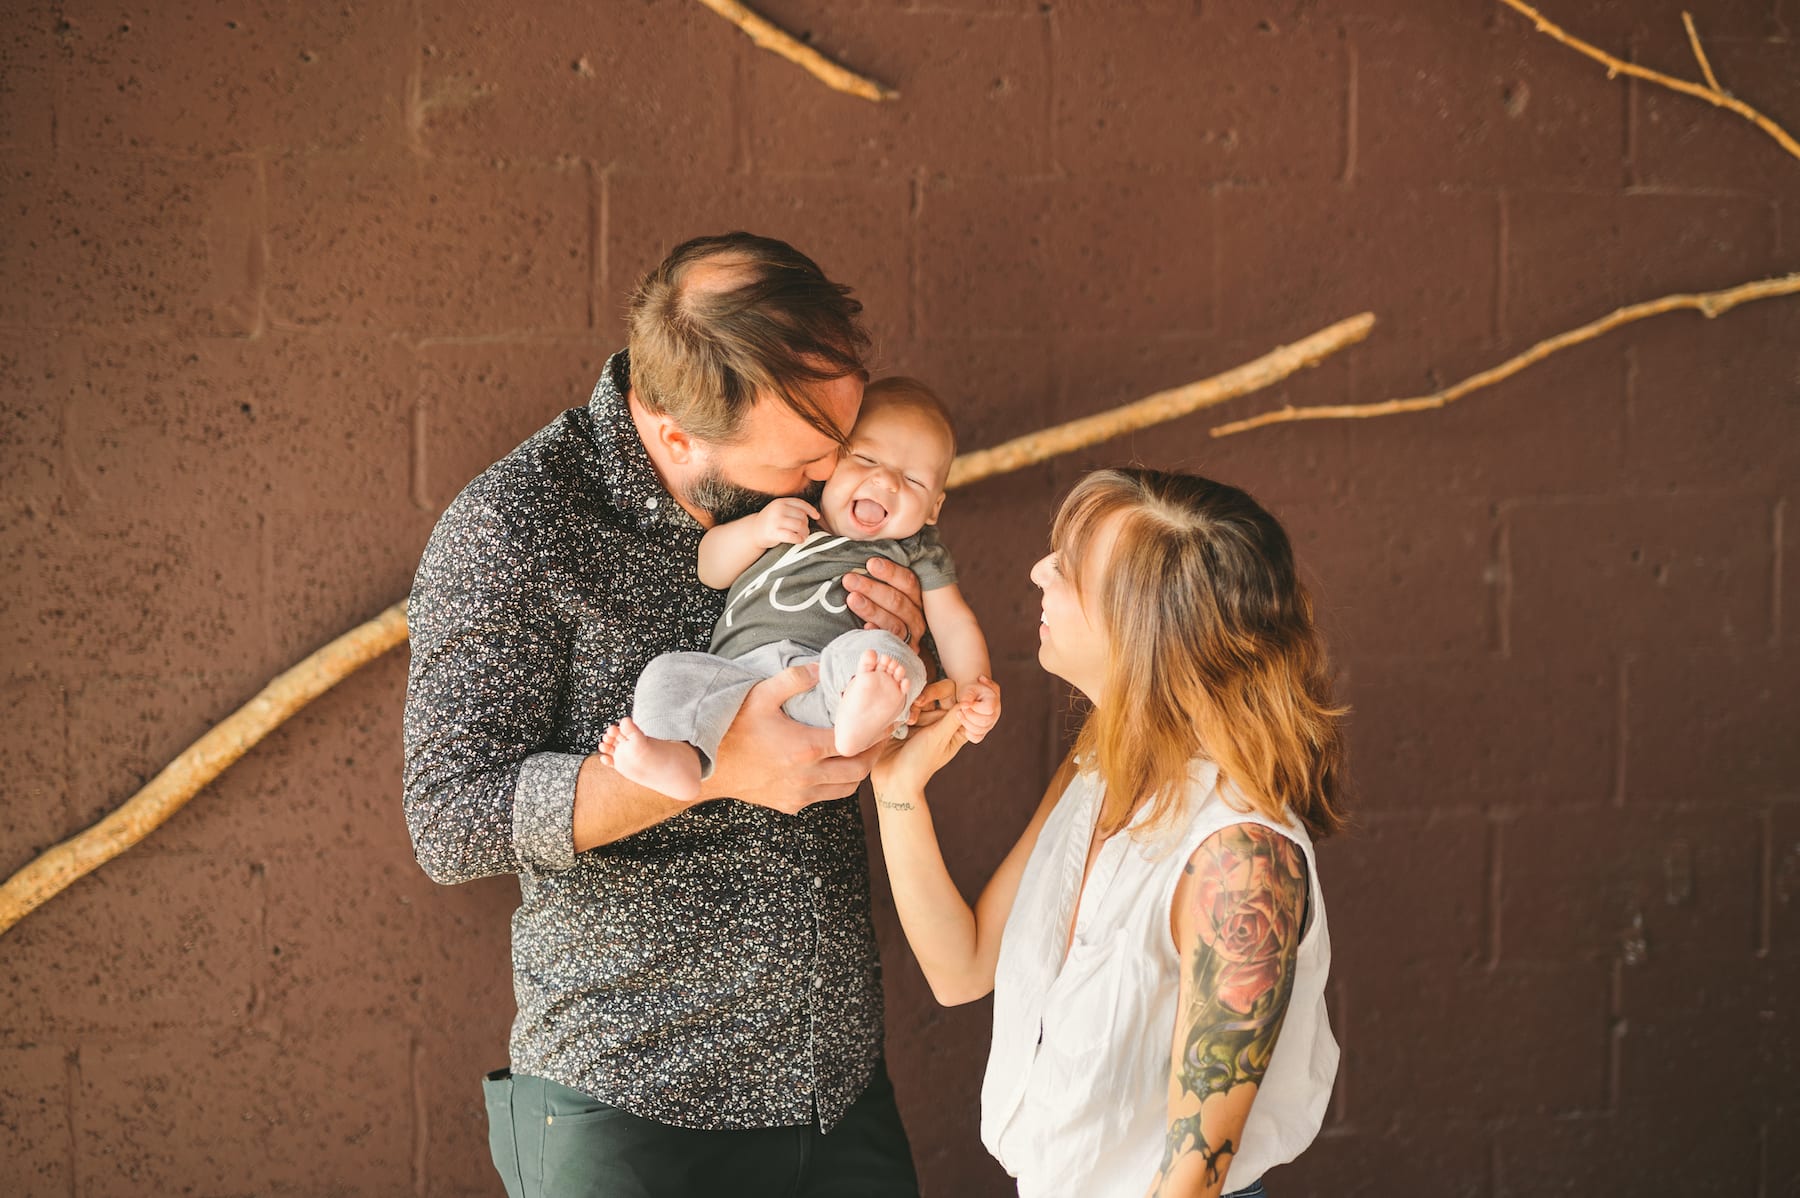 Brew Urban Cafe Man and tattooed woman with man holding and kissing a baby who is smiling all posing for the camera